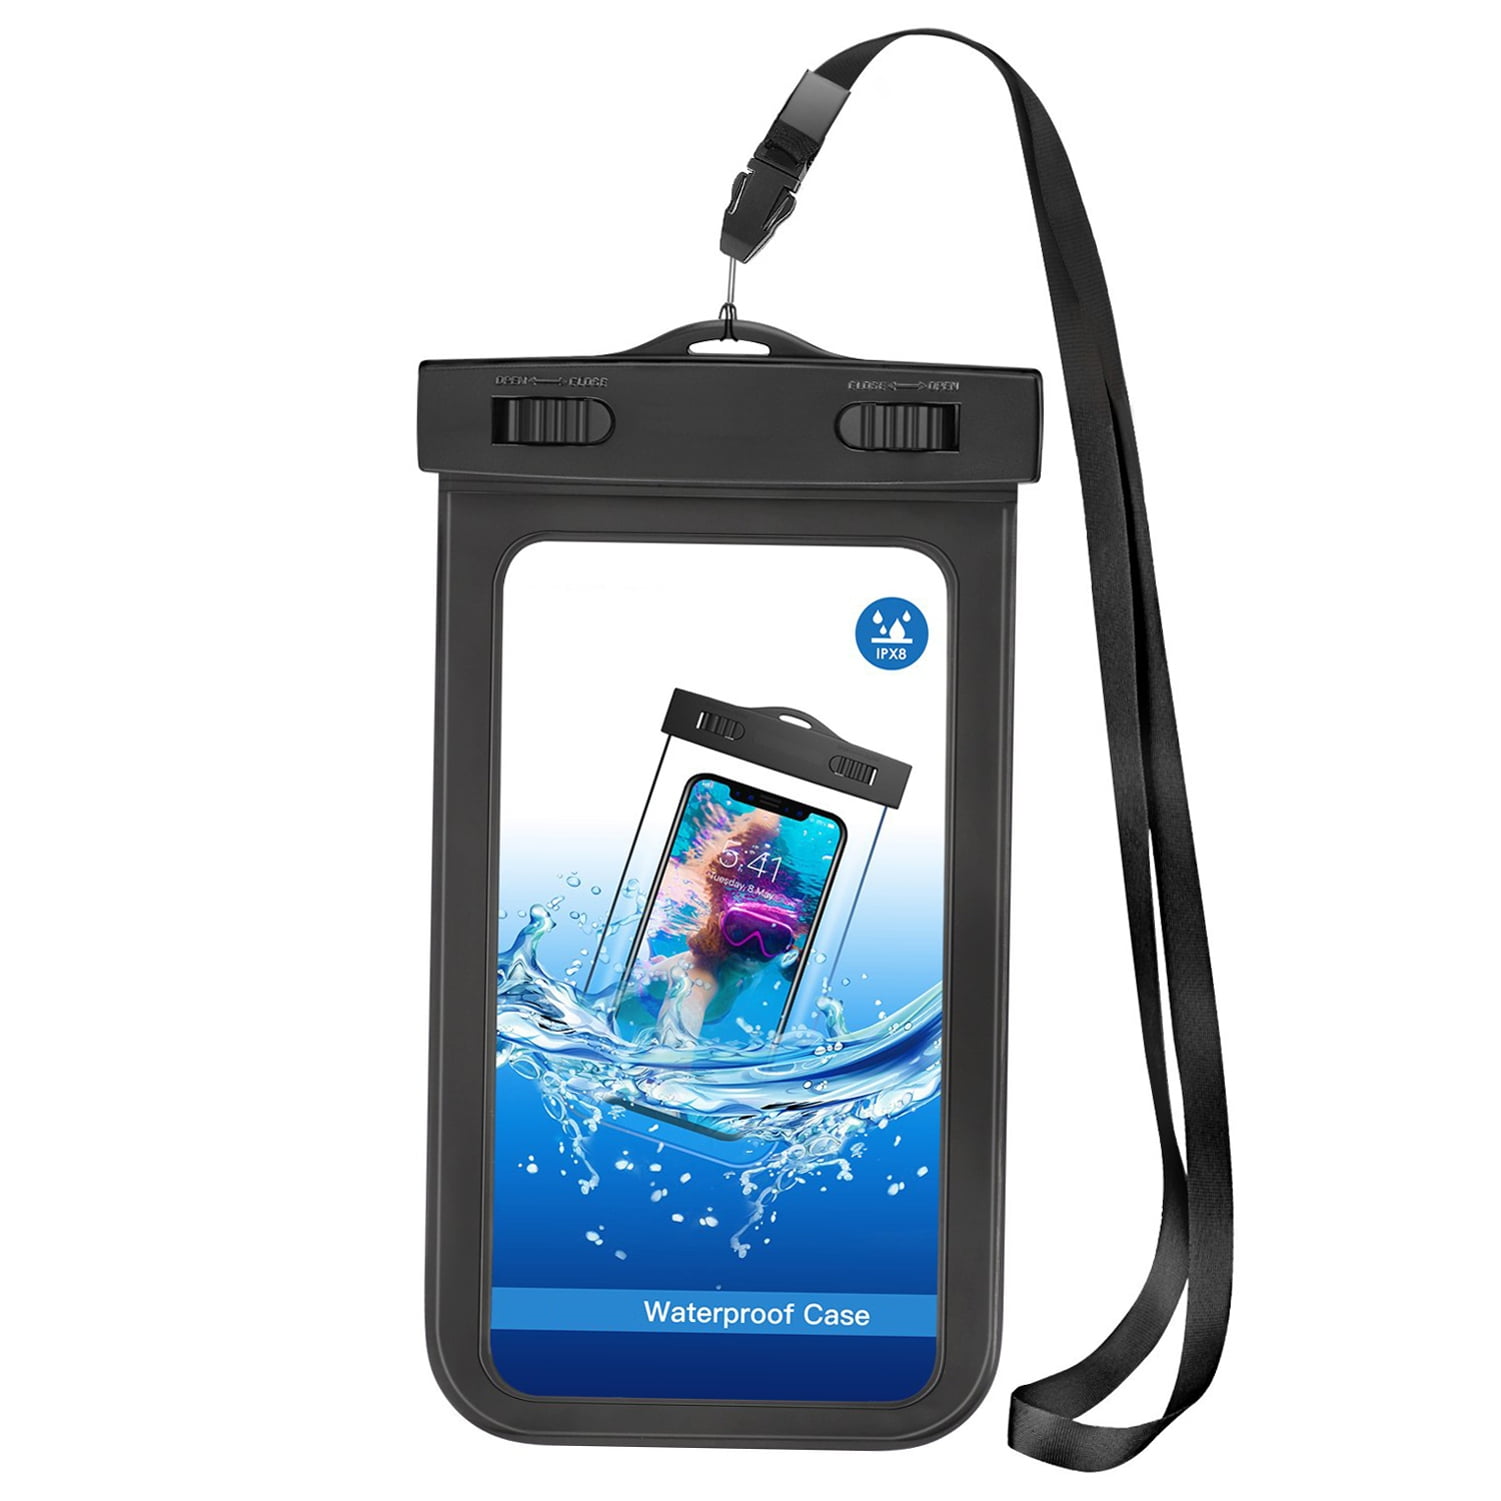 Waterproof Underwater Pouch Dry Bag Case Cover for iPhone Pro Max Plus Samsung